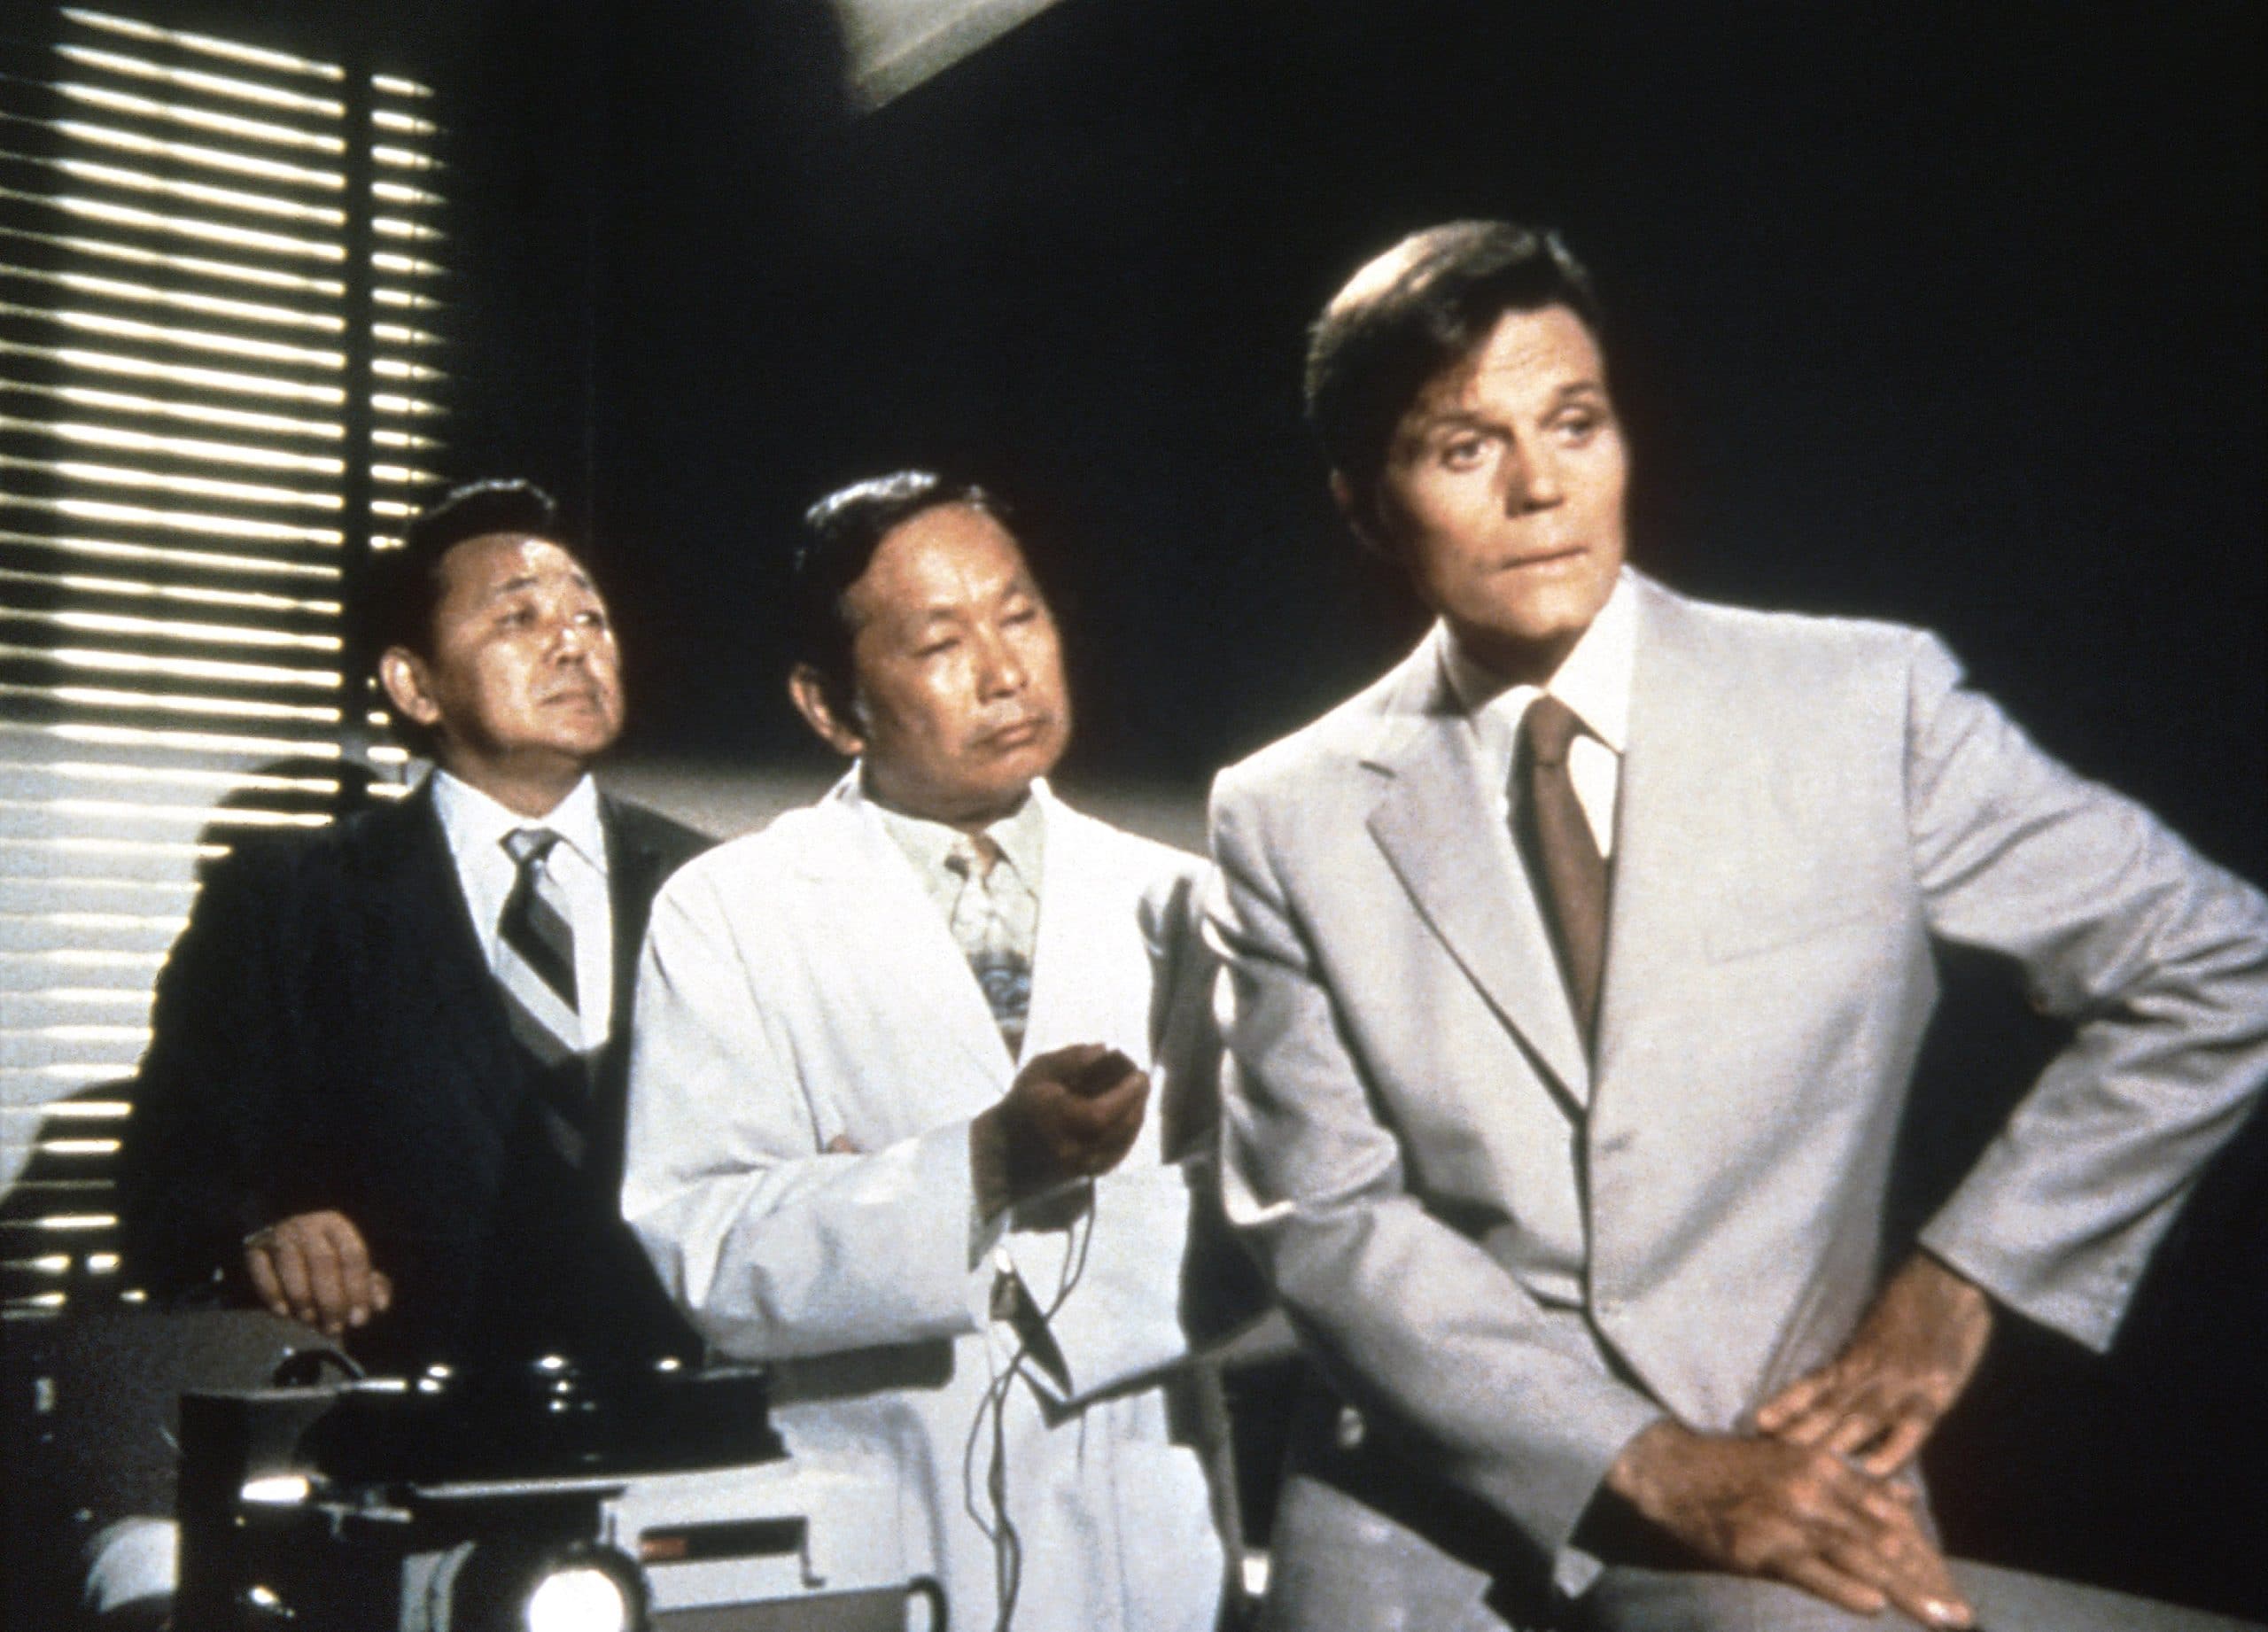 HAWAII FIVE-O, (from left): Kam Fong, Harry Endo, Jack Lord, 1968-80